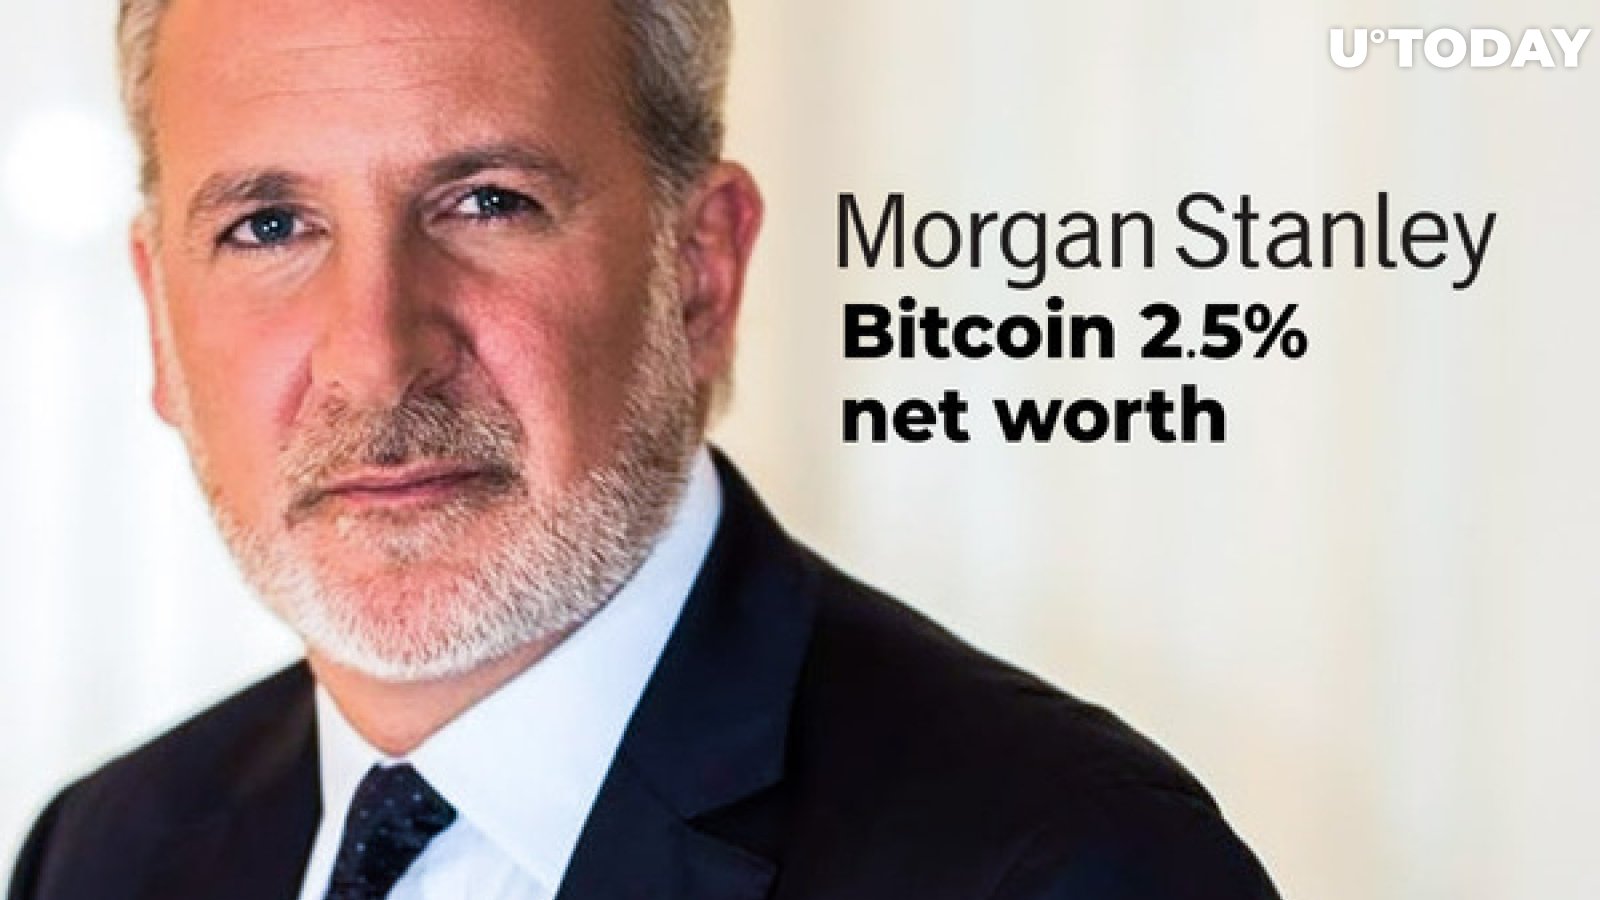 Morgan Stanley Offers BTC Exposure Only for 2.5% of Clients' Net Worth, Peter Schiff Explains Why